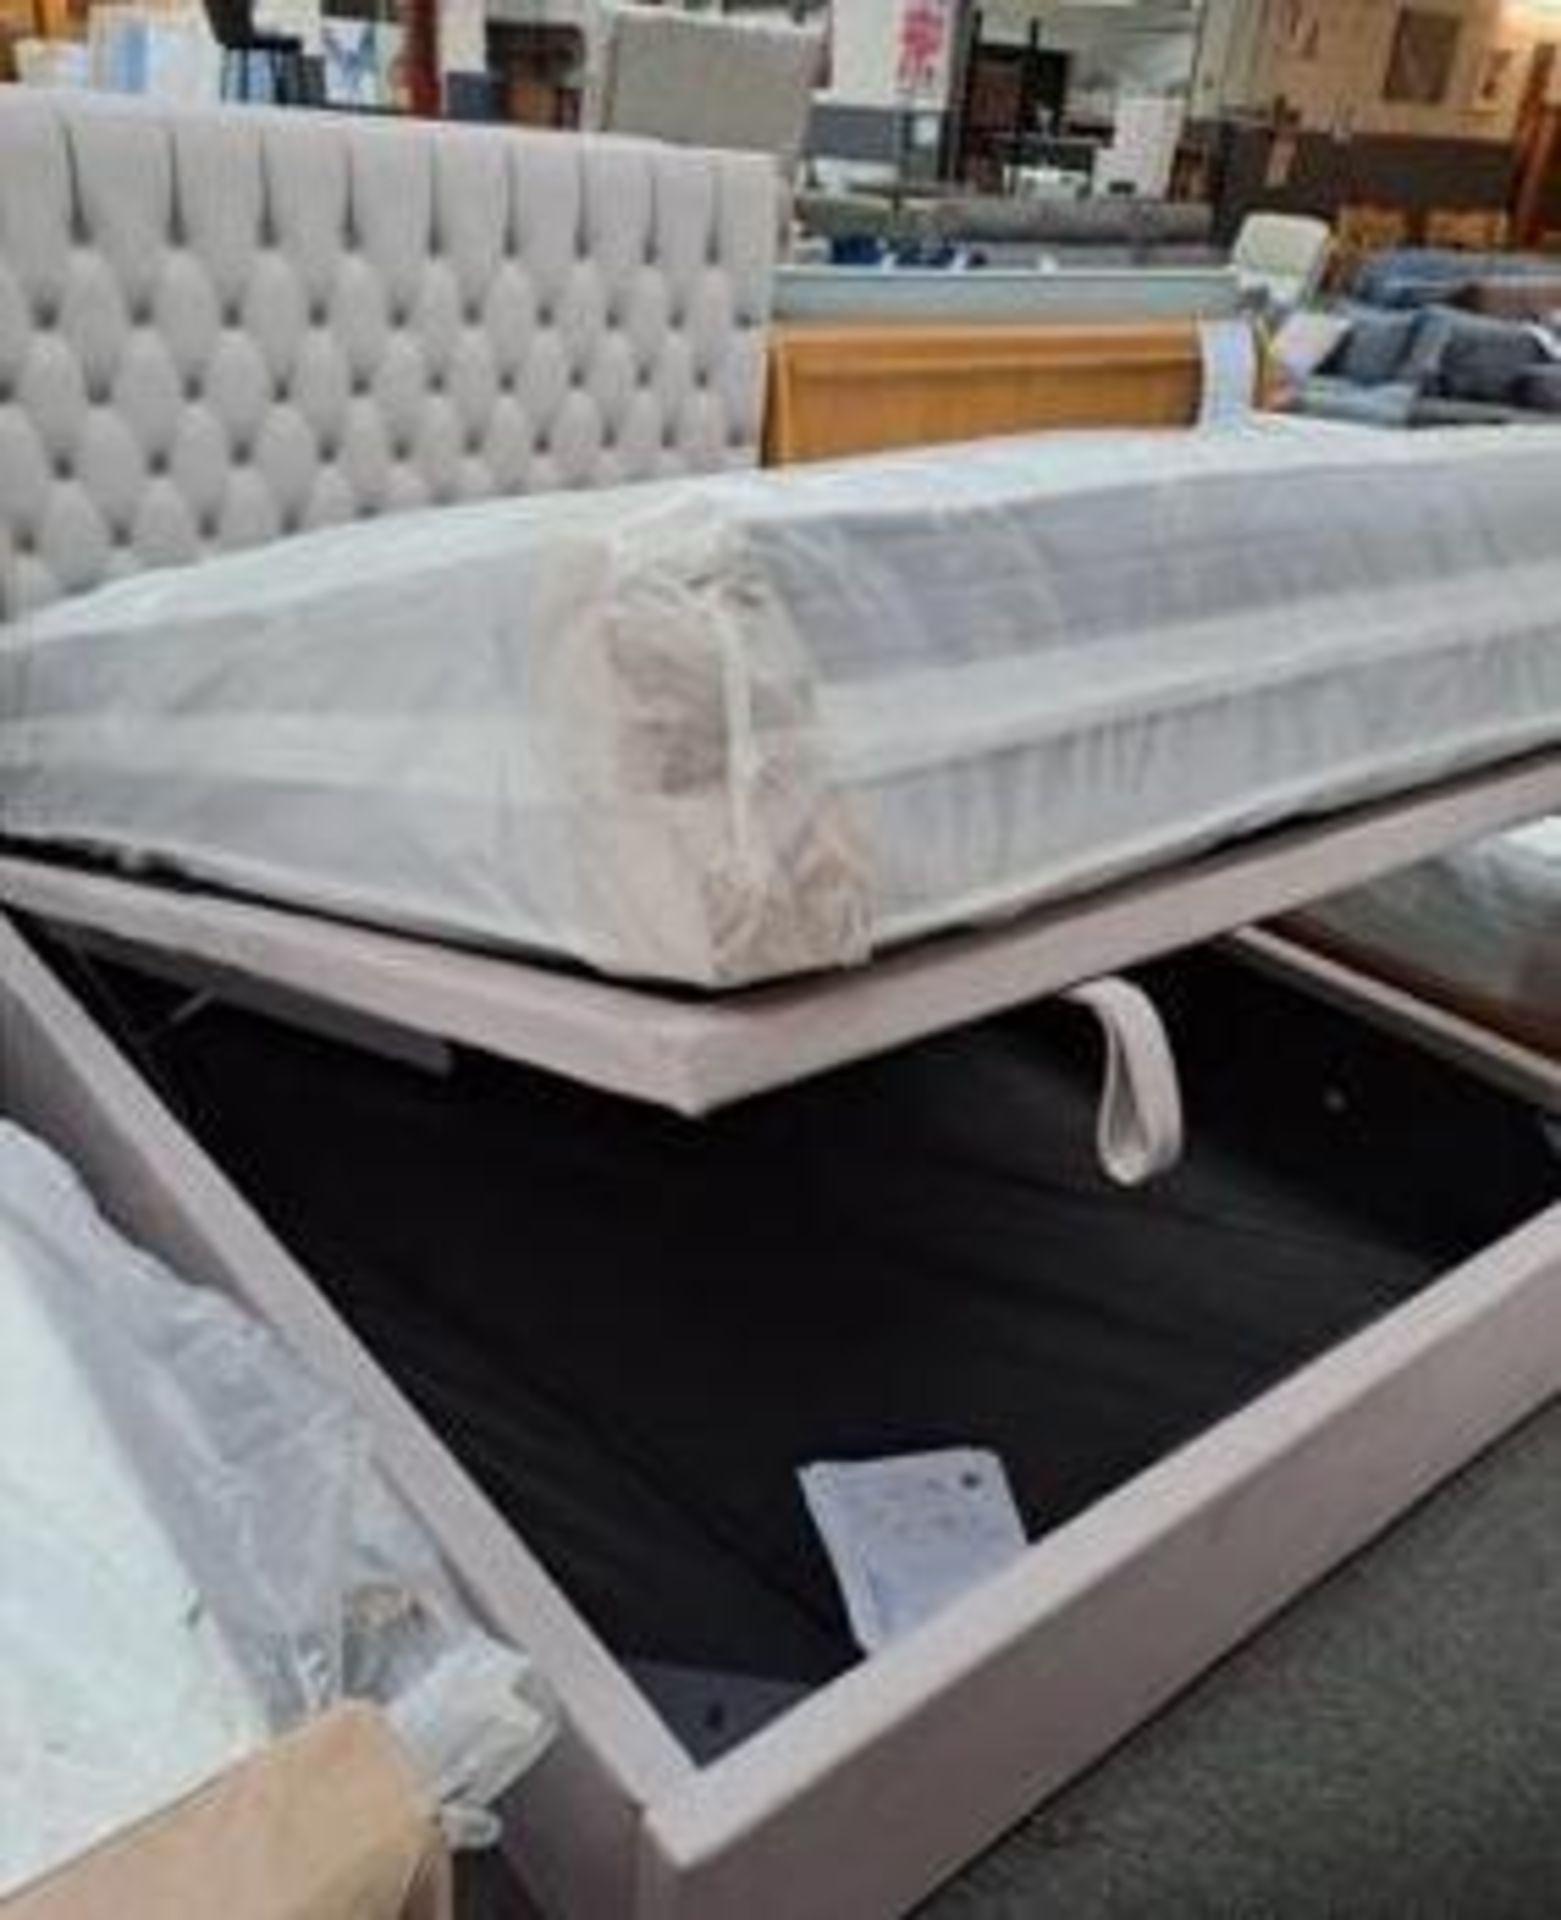 *EX DISPLAY* Furniture Village Sergio king size deep buttoned heavy duty ottoman bed with mattress